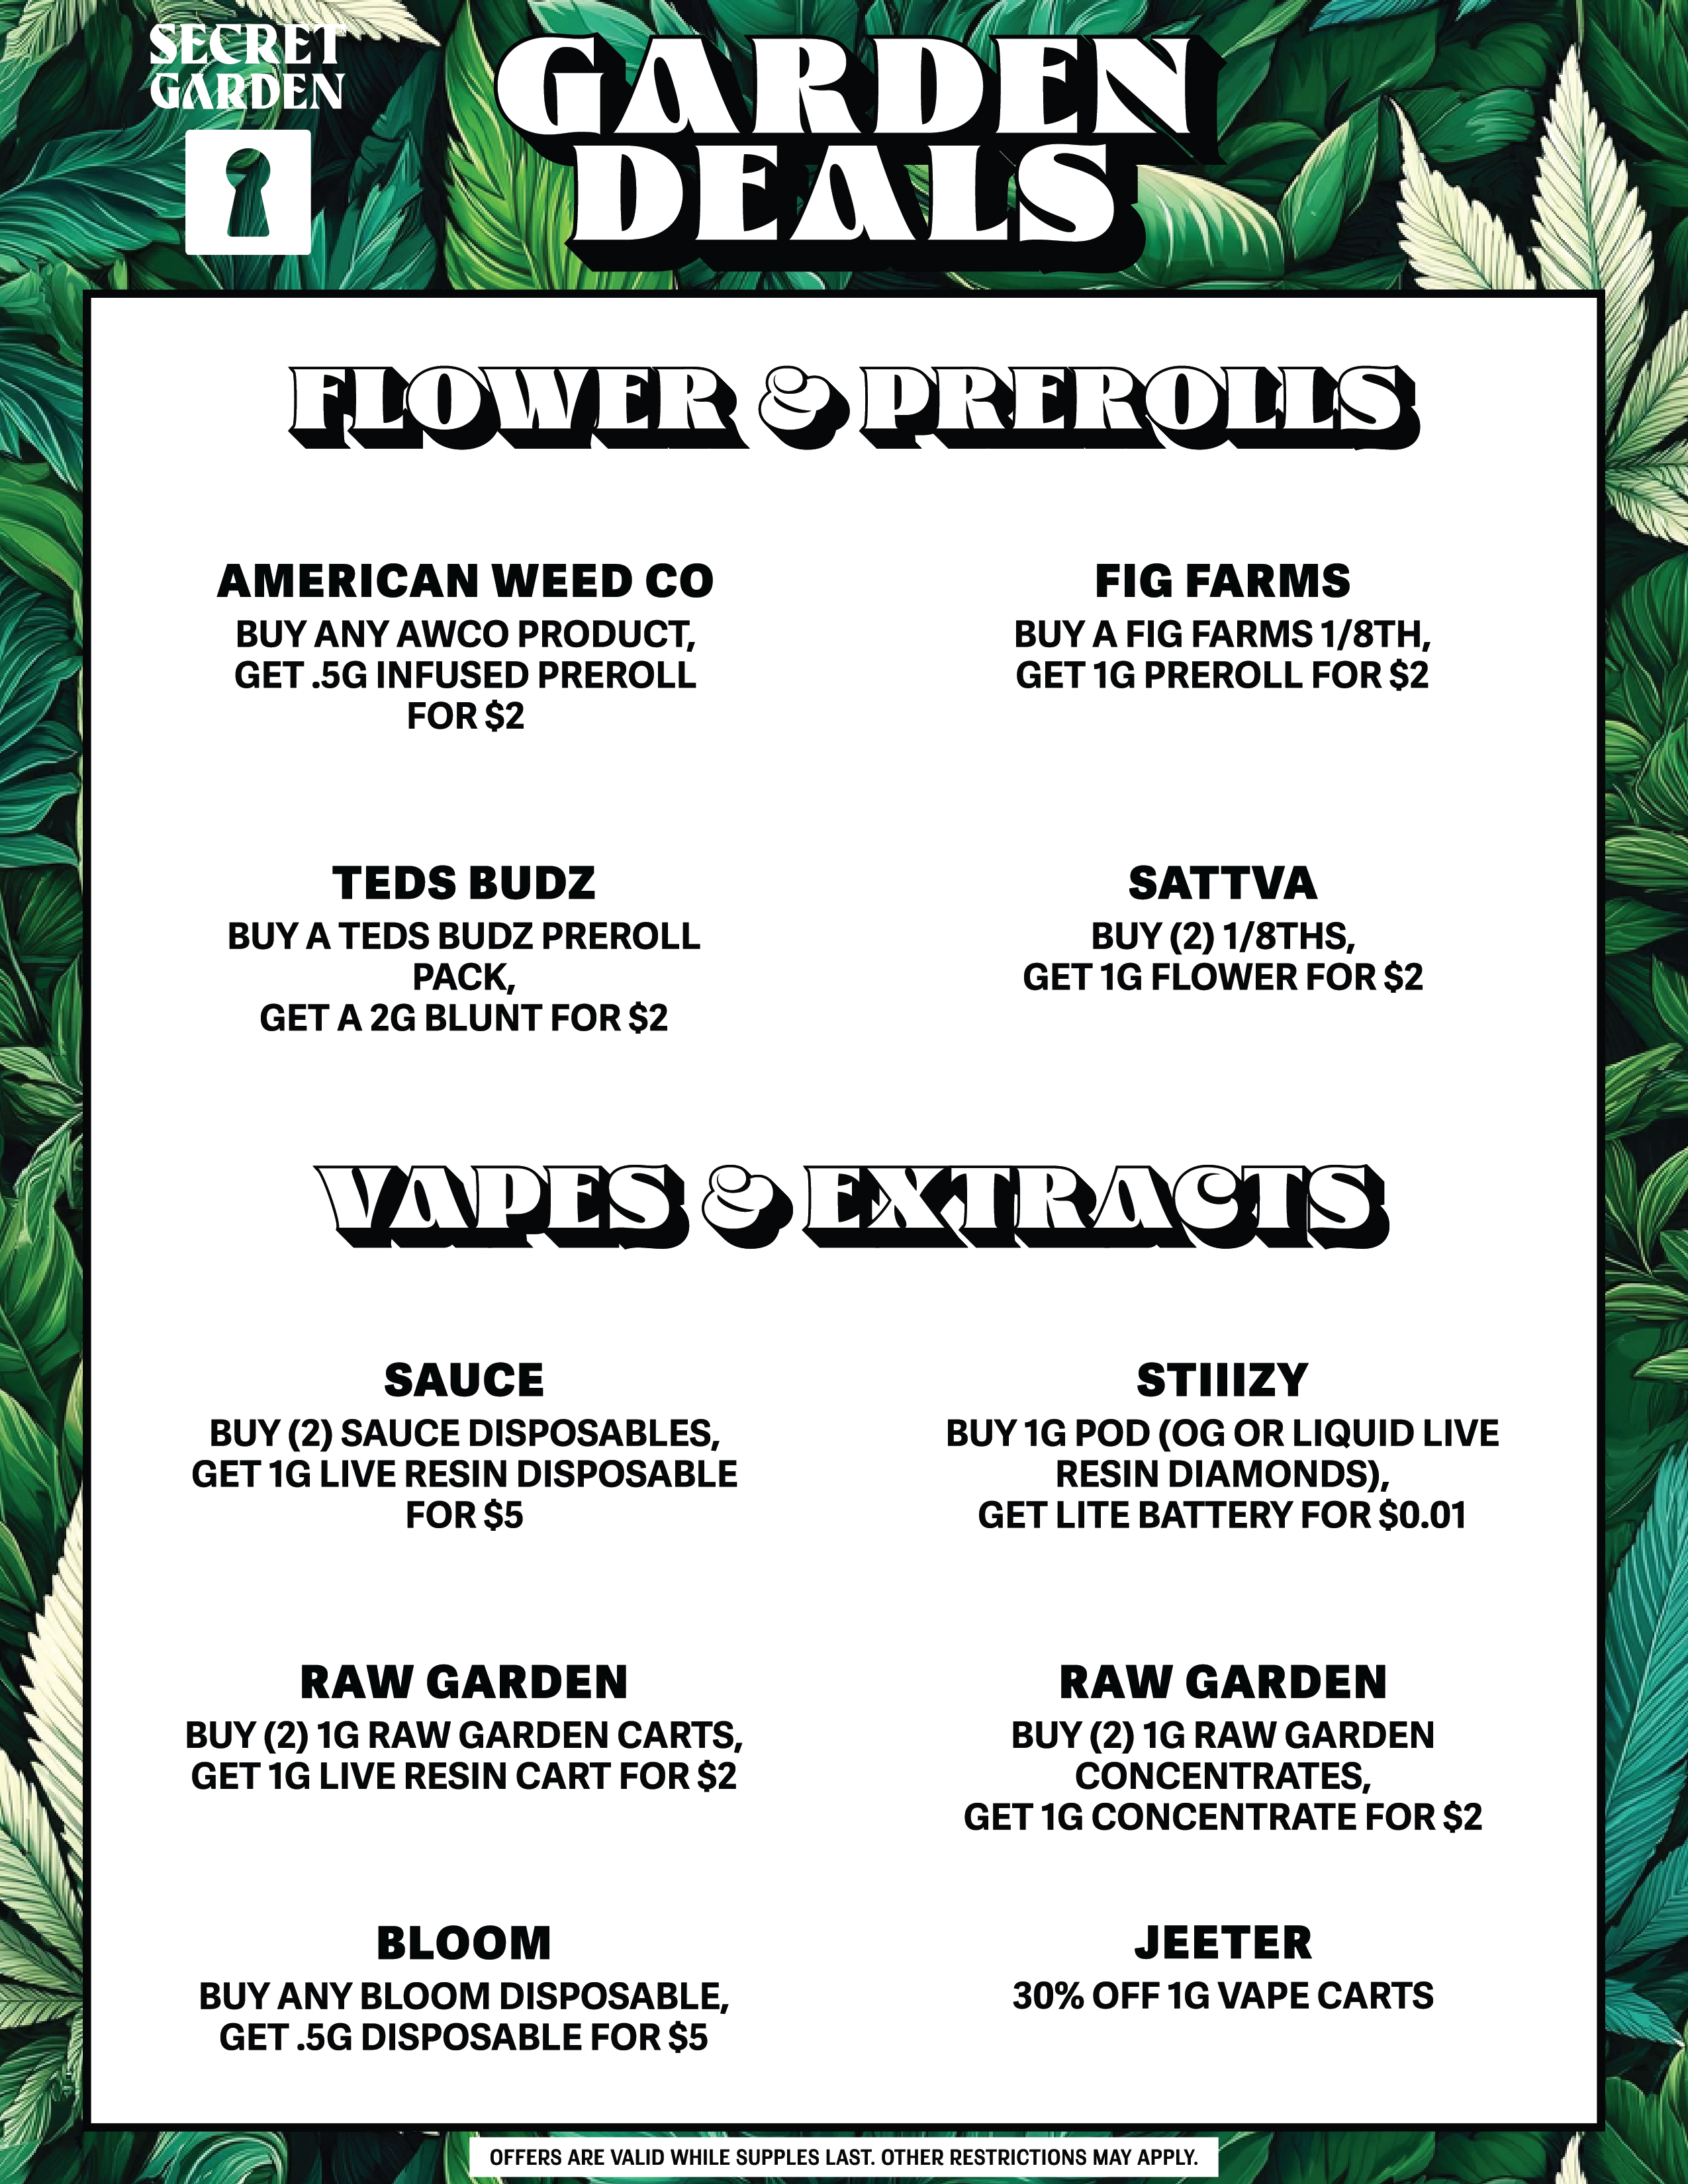 A flyer describing Garden Deals, relating to Flower, Prerolls, Vapes, and Extracts